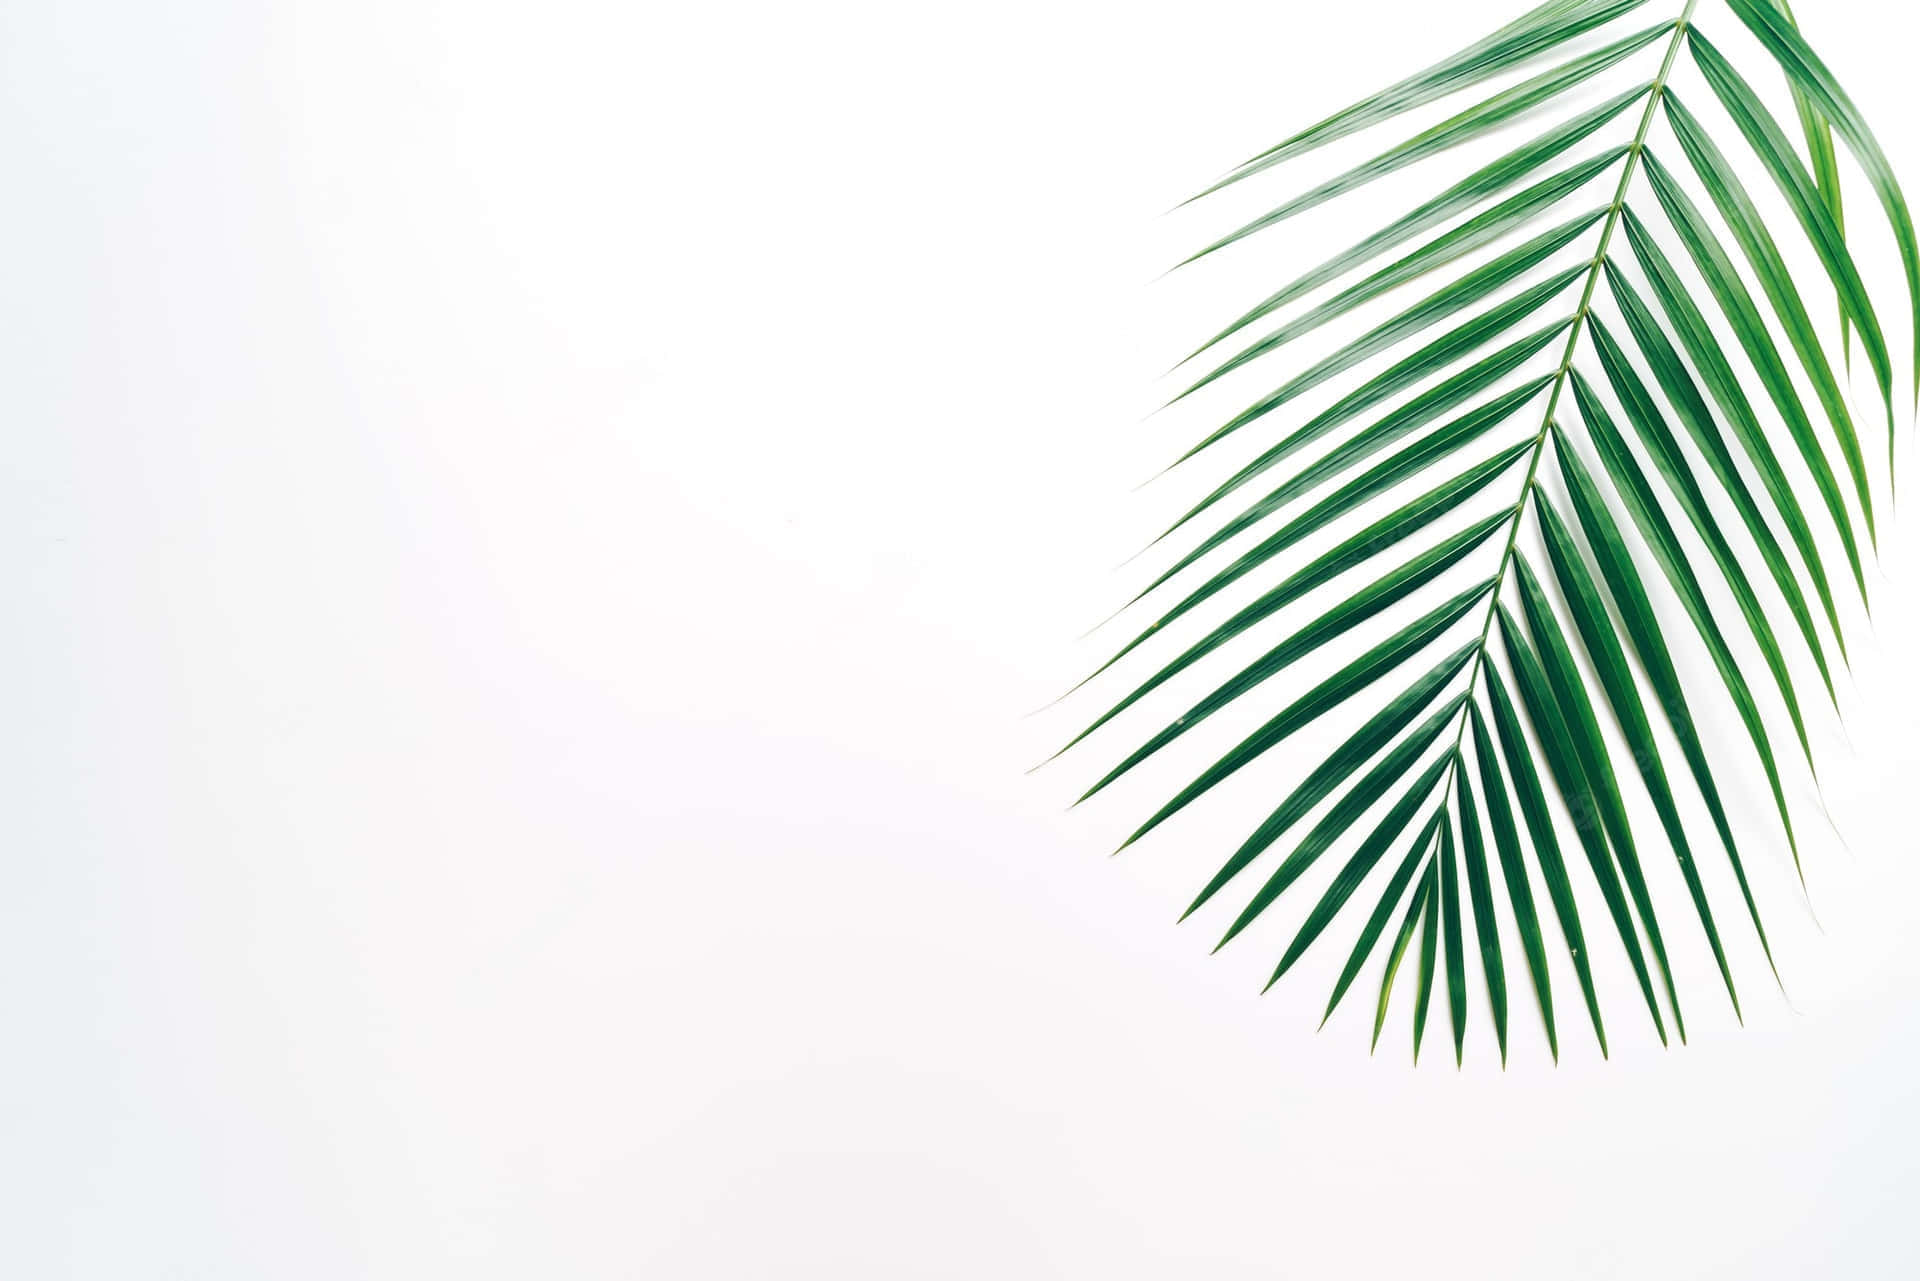 Enjoy a tropical paradise with this calming Palm Leaves background.